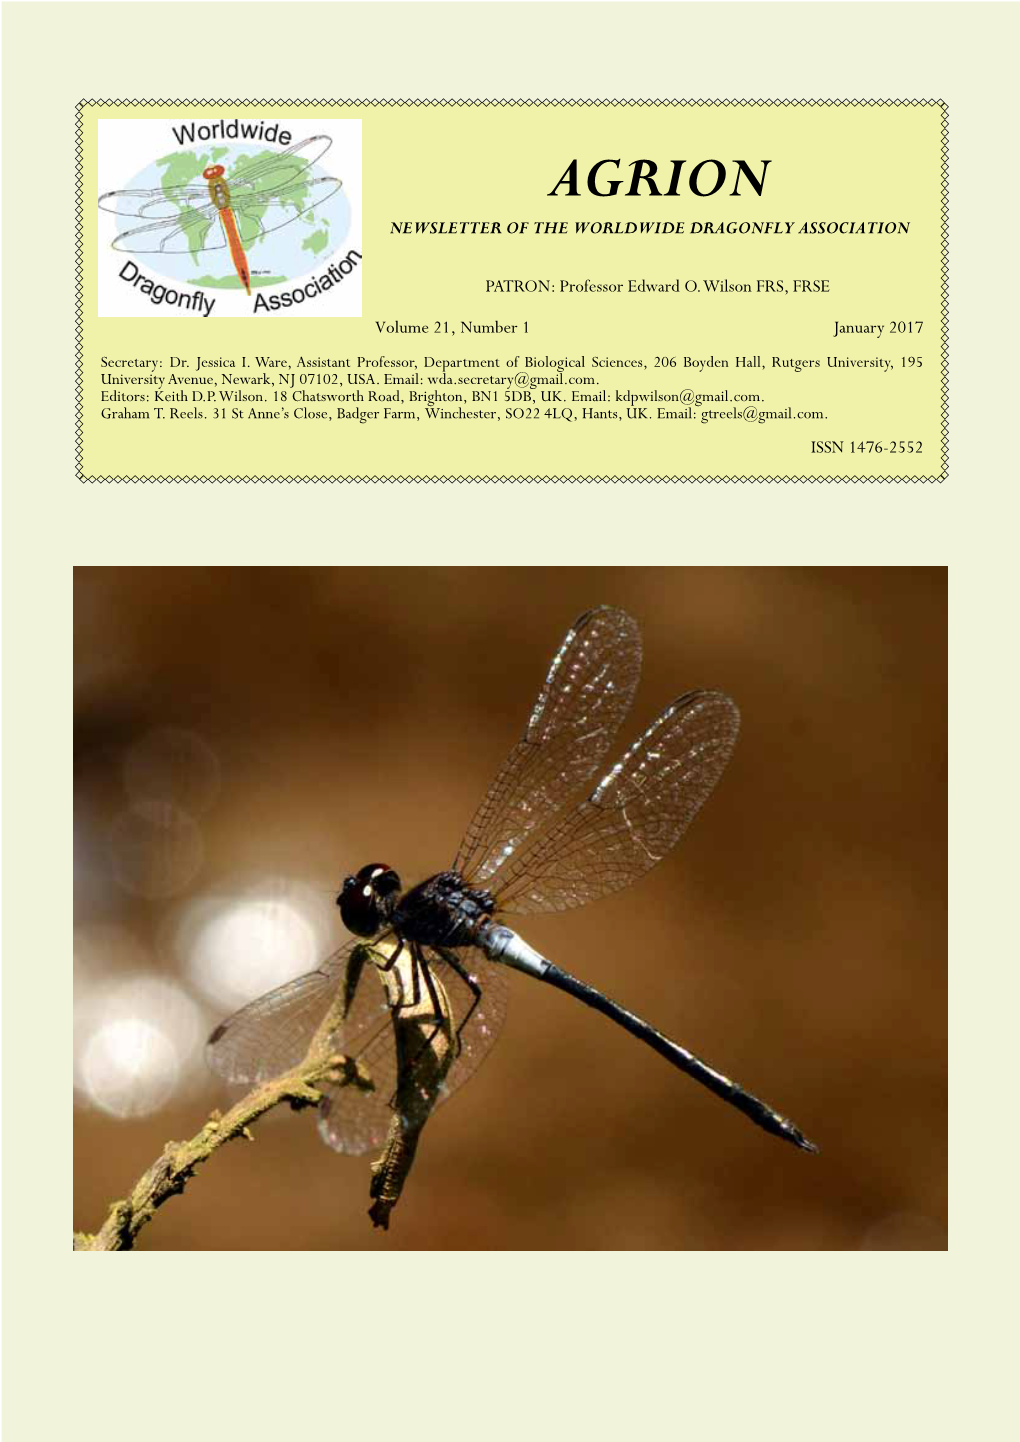 Agrion 21(1) - January 2017 AGRION NEWSLETTER of the WORLDWIDE DRAGONFLY ASSOCIATION